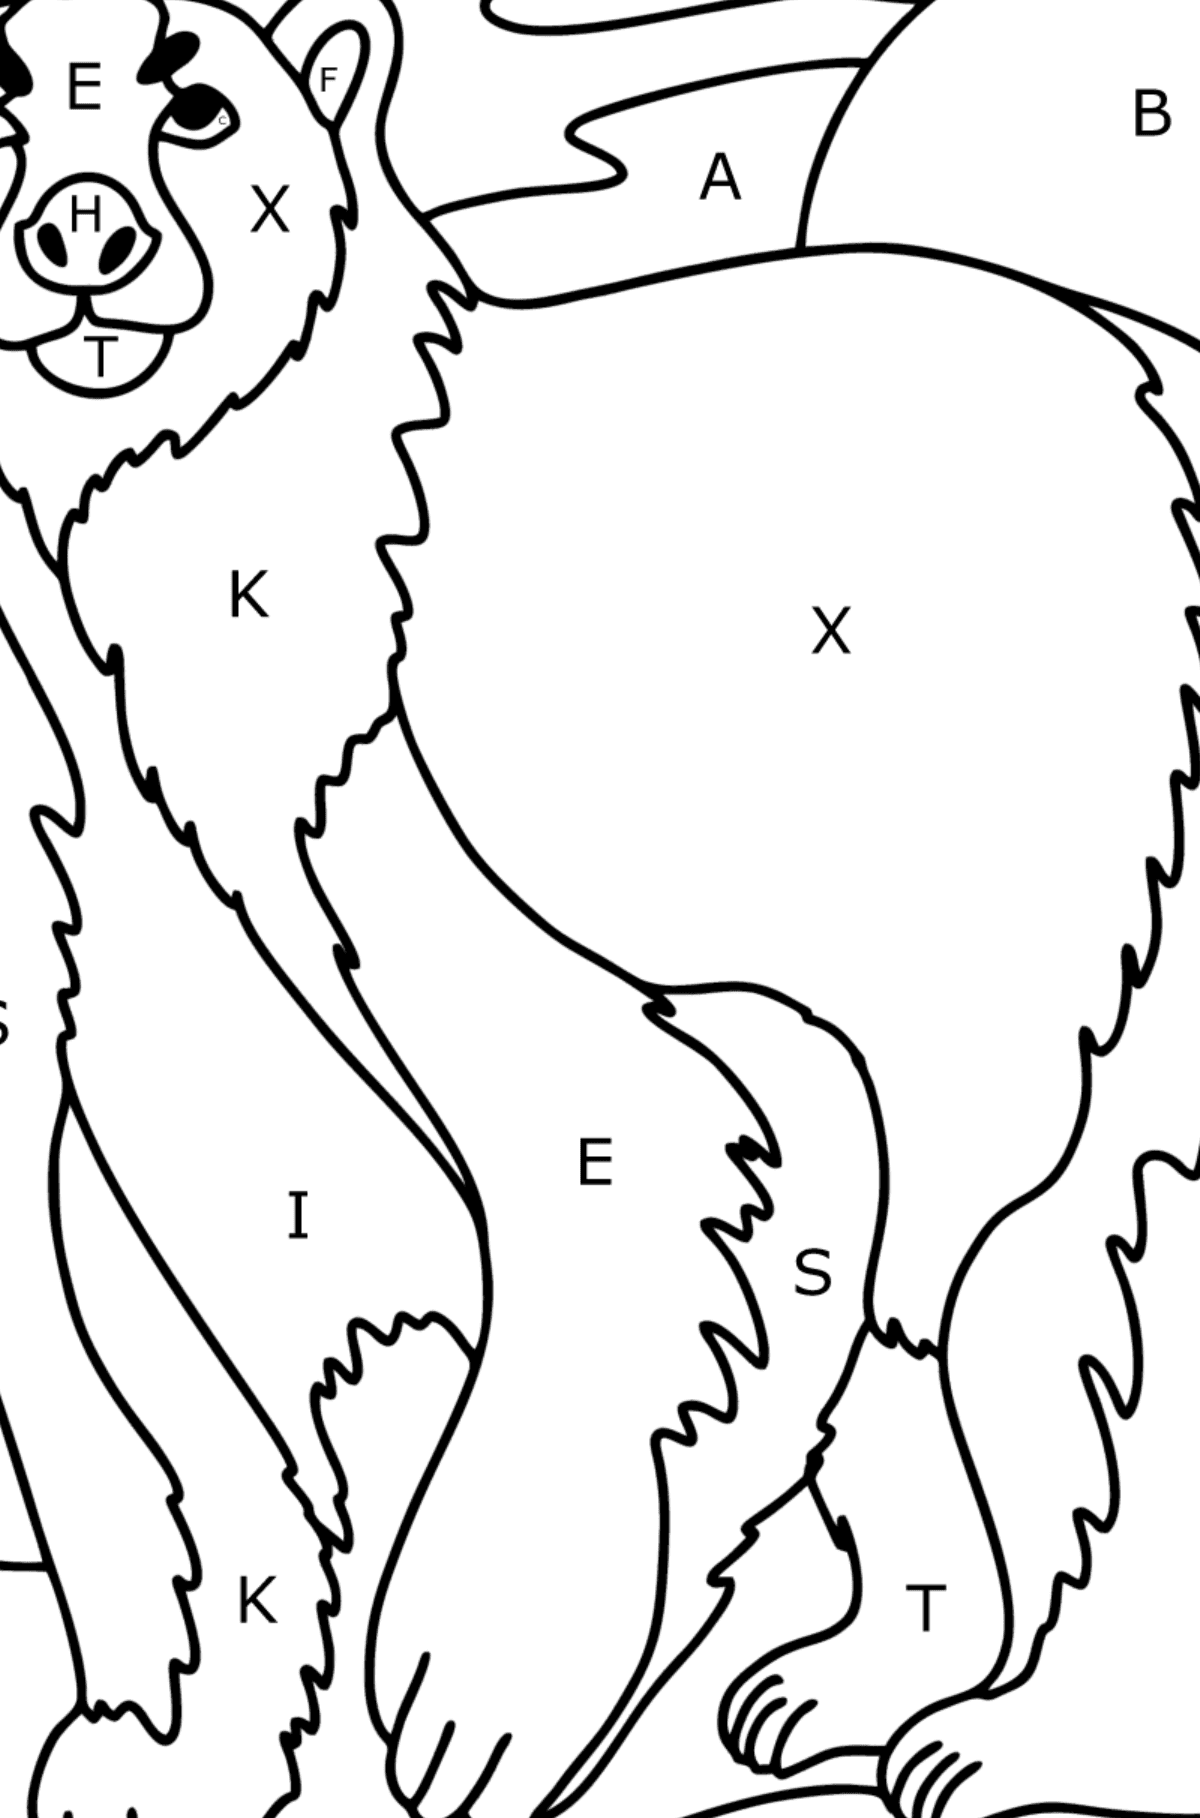 Polar bear coloring page - Coloring by Letters for Kids